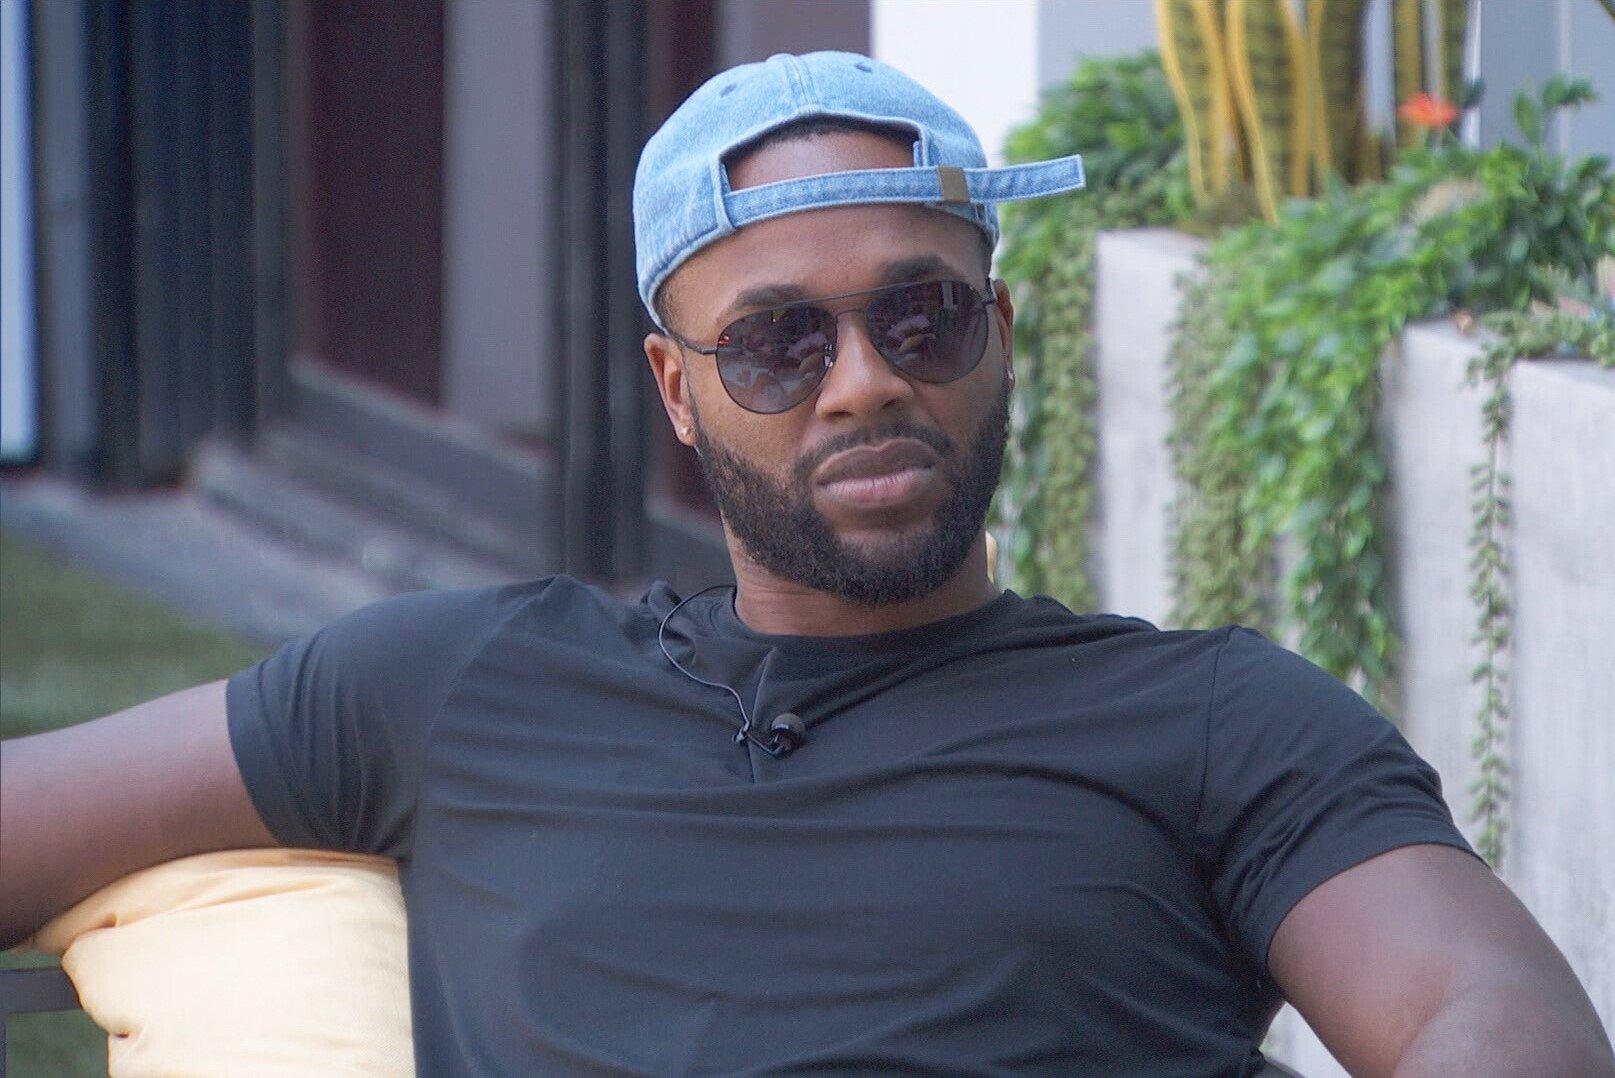 Monte Taylor, who, according to 'Big Brother 24' spoilers, made the final four, wears a black shirt, light blue baseball cap backwards, and sunglasses.